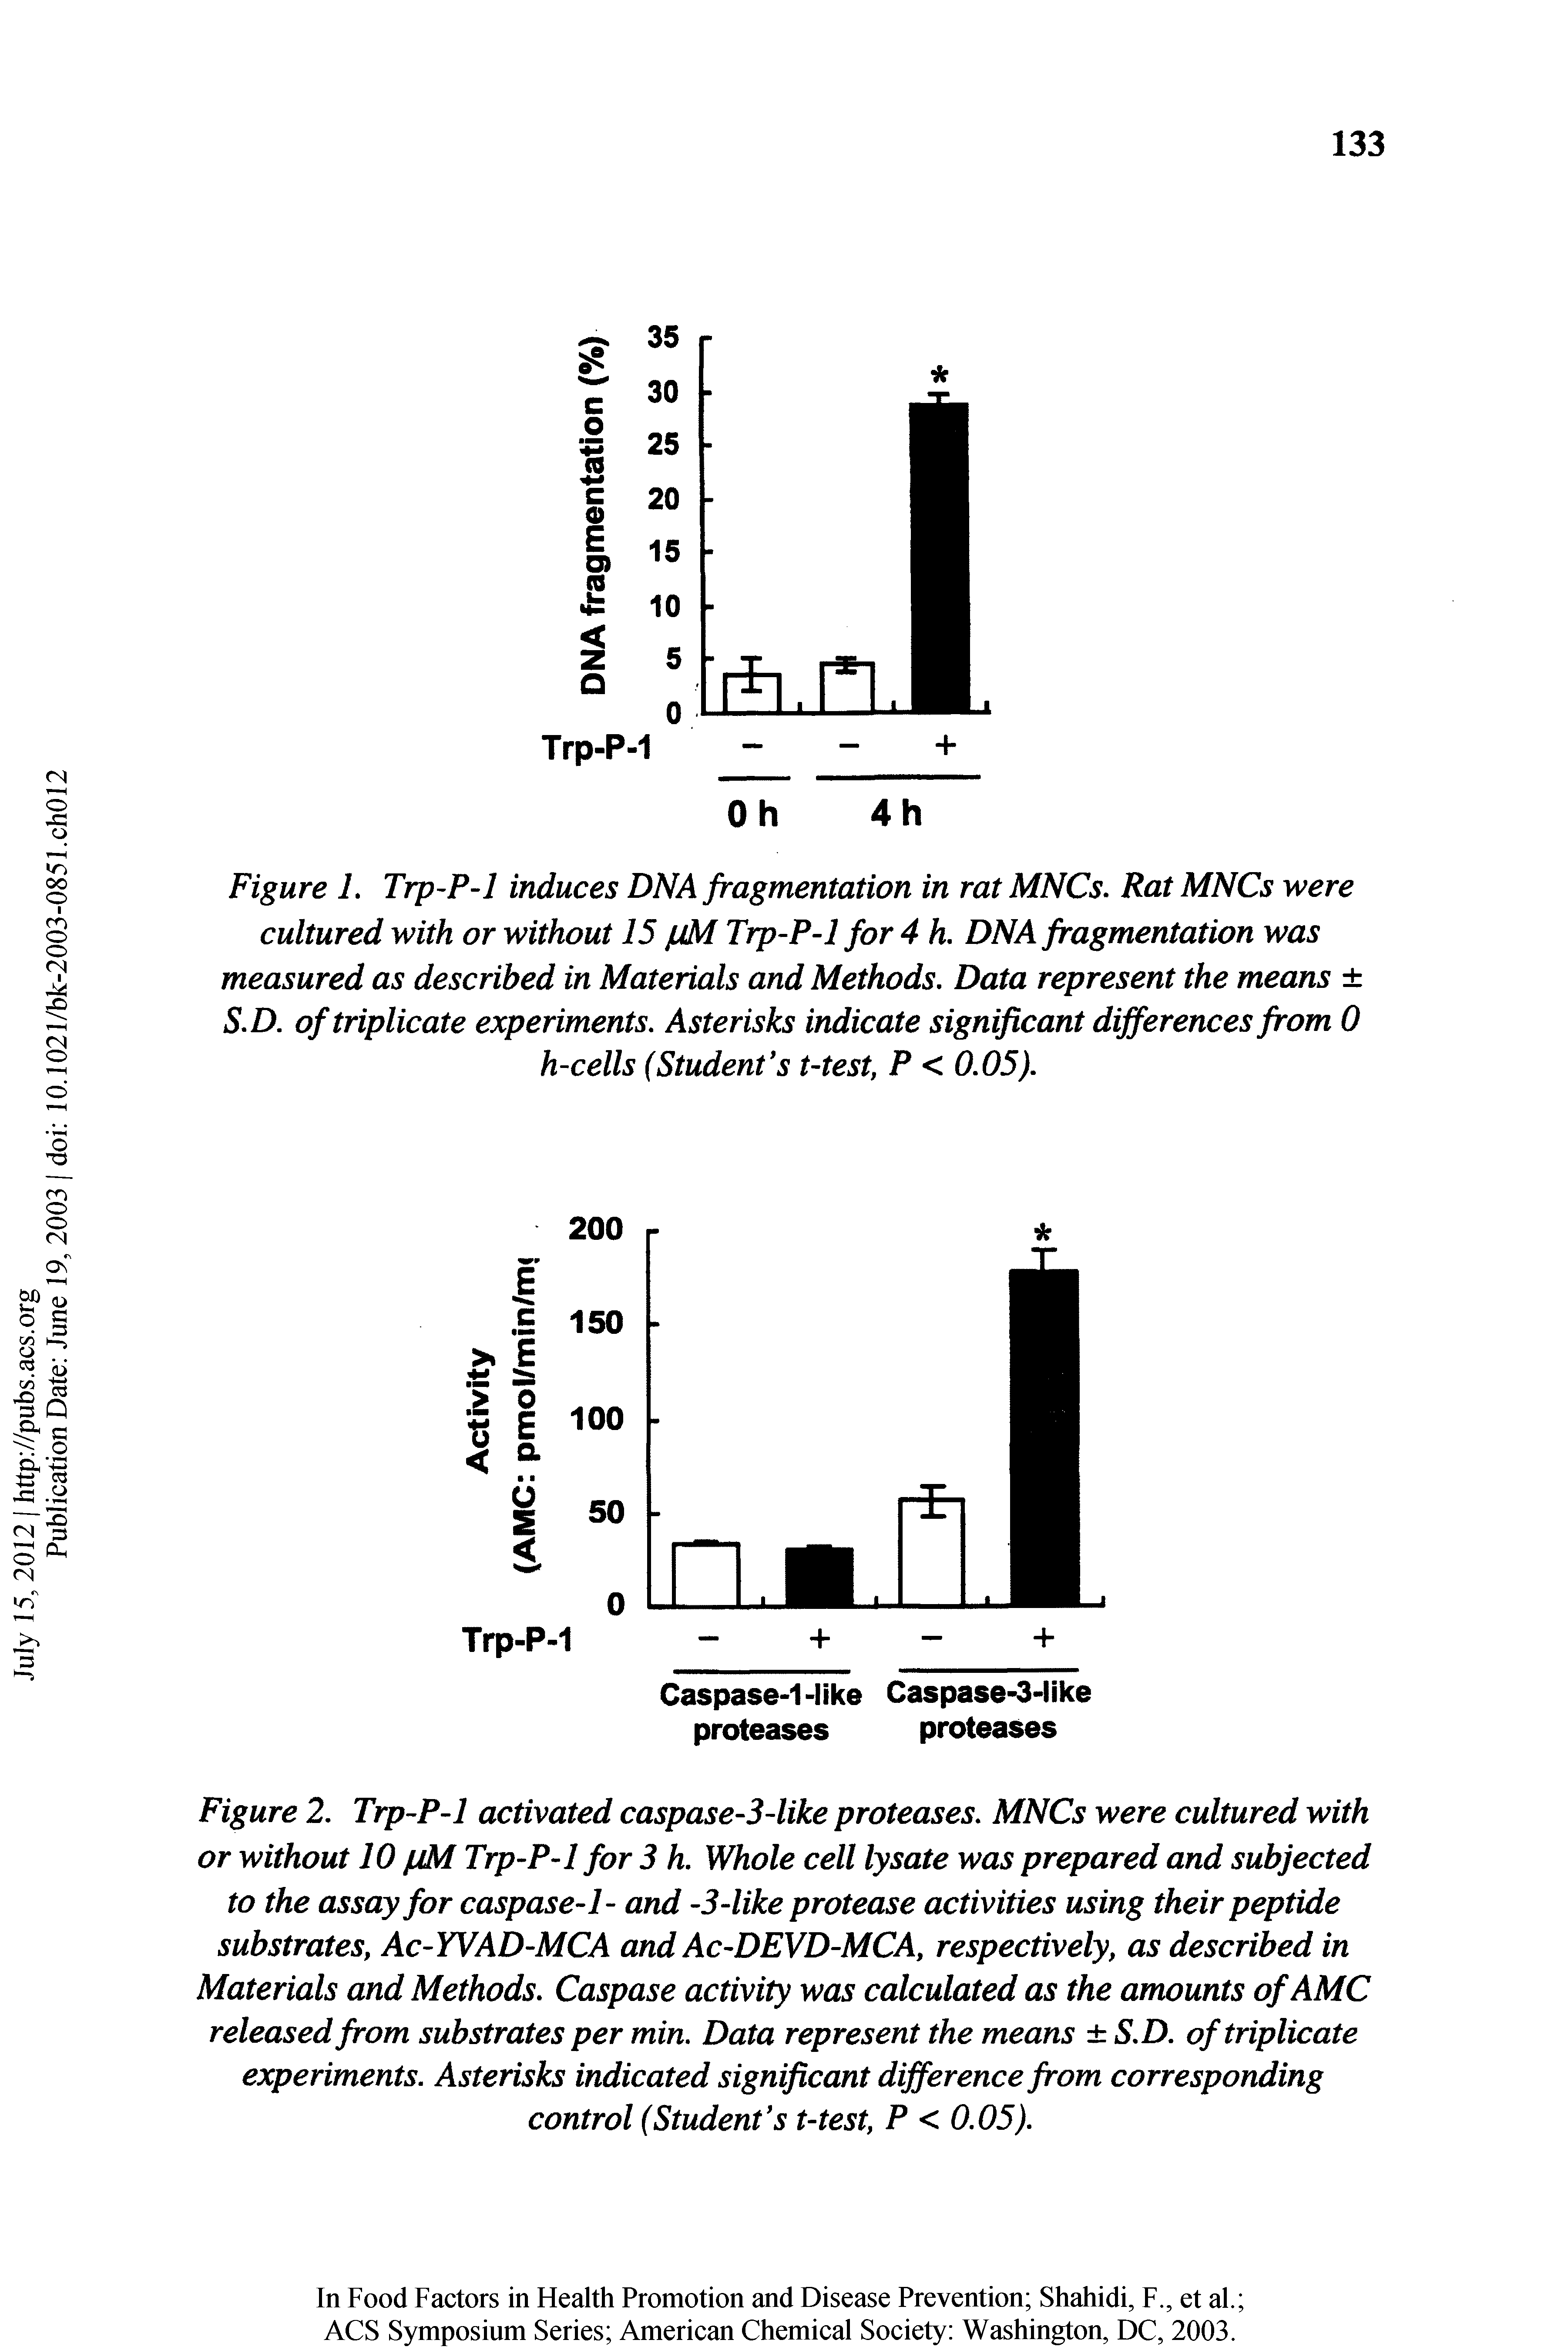 Figure 2, Trp-P-1 activated caspase-3-like proteases, MNCs were cultured with or without 10 pM Trp-P-1 for 3 h. Whole cell lysate was prepared and subjected to the assay for caspase-1- and -3-like protease activities using their peptide substrates, Ac-YVAD-MCA and Ac-DEVD-MCA, respectively, as described in Materials and Methods, Caspase activity was calculated as the amounts ofAMC released from substrates per min. Data represent the means S,D. of triplicate experiments. Asterisks indicated significant difference from corresponding control (Student s t-test, P < 0.05).